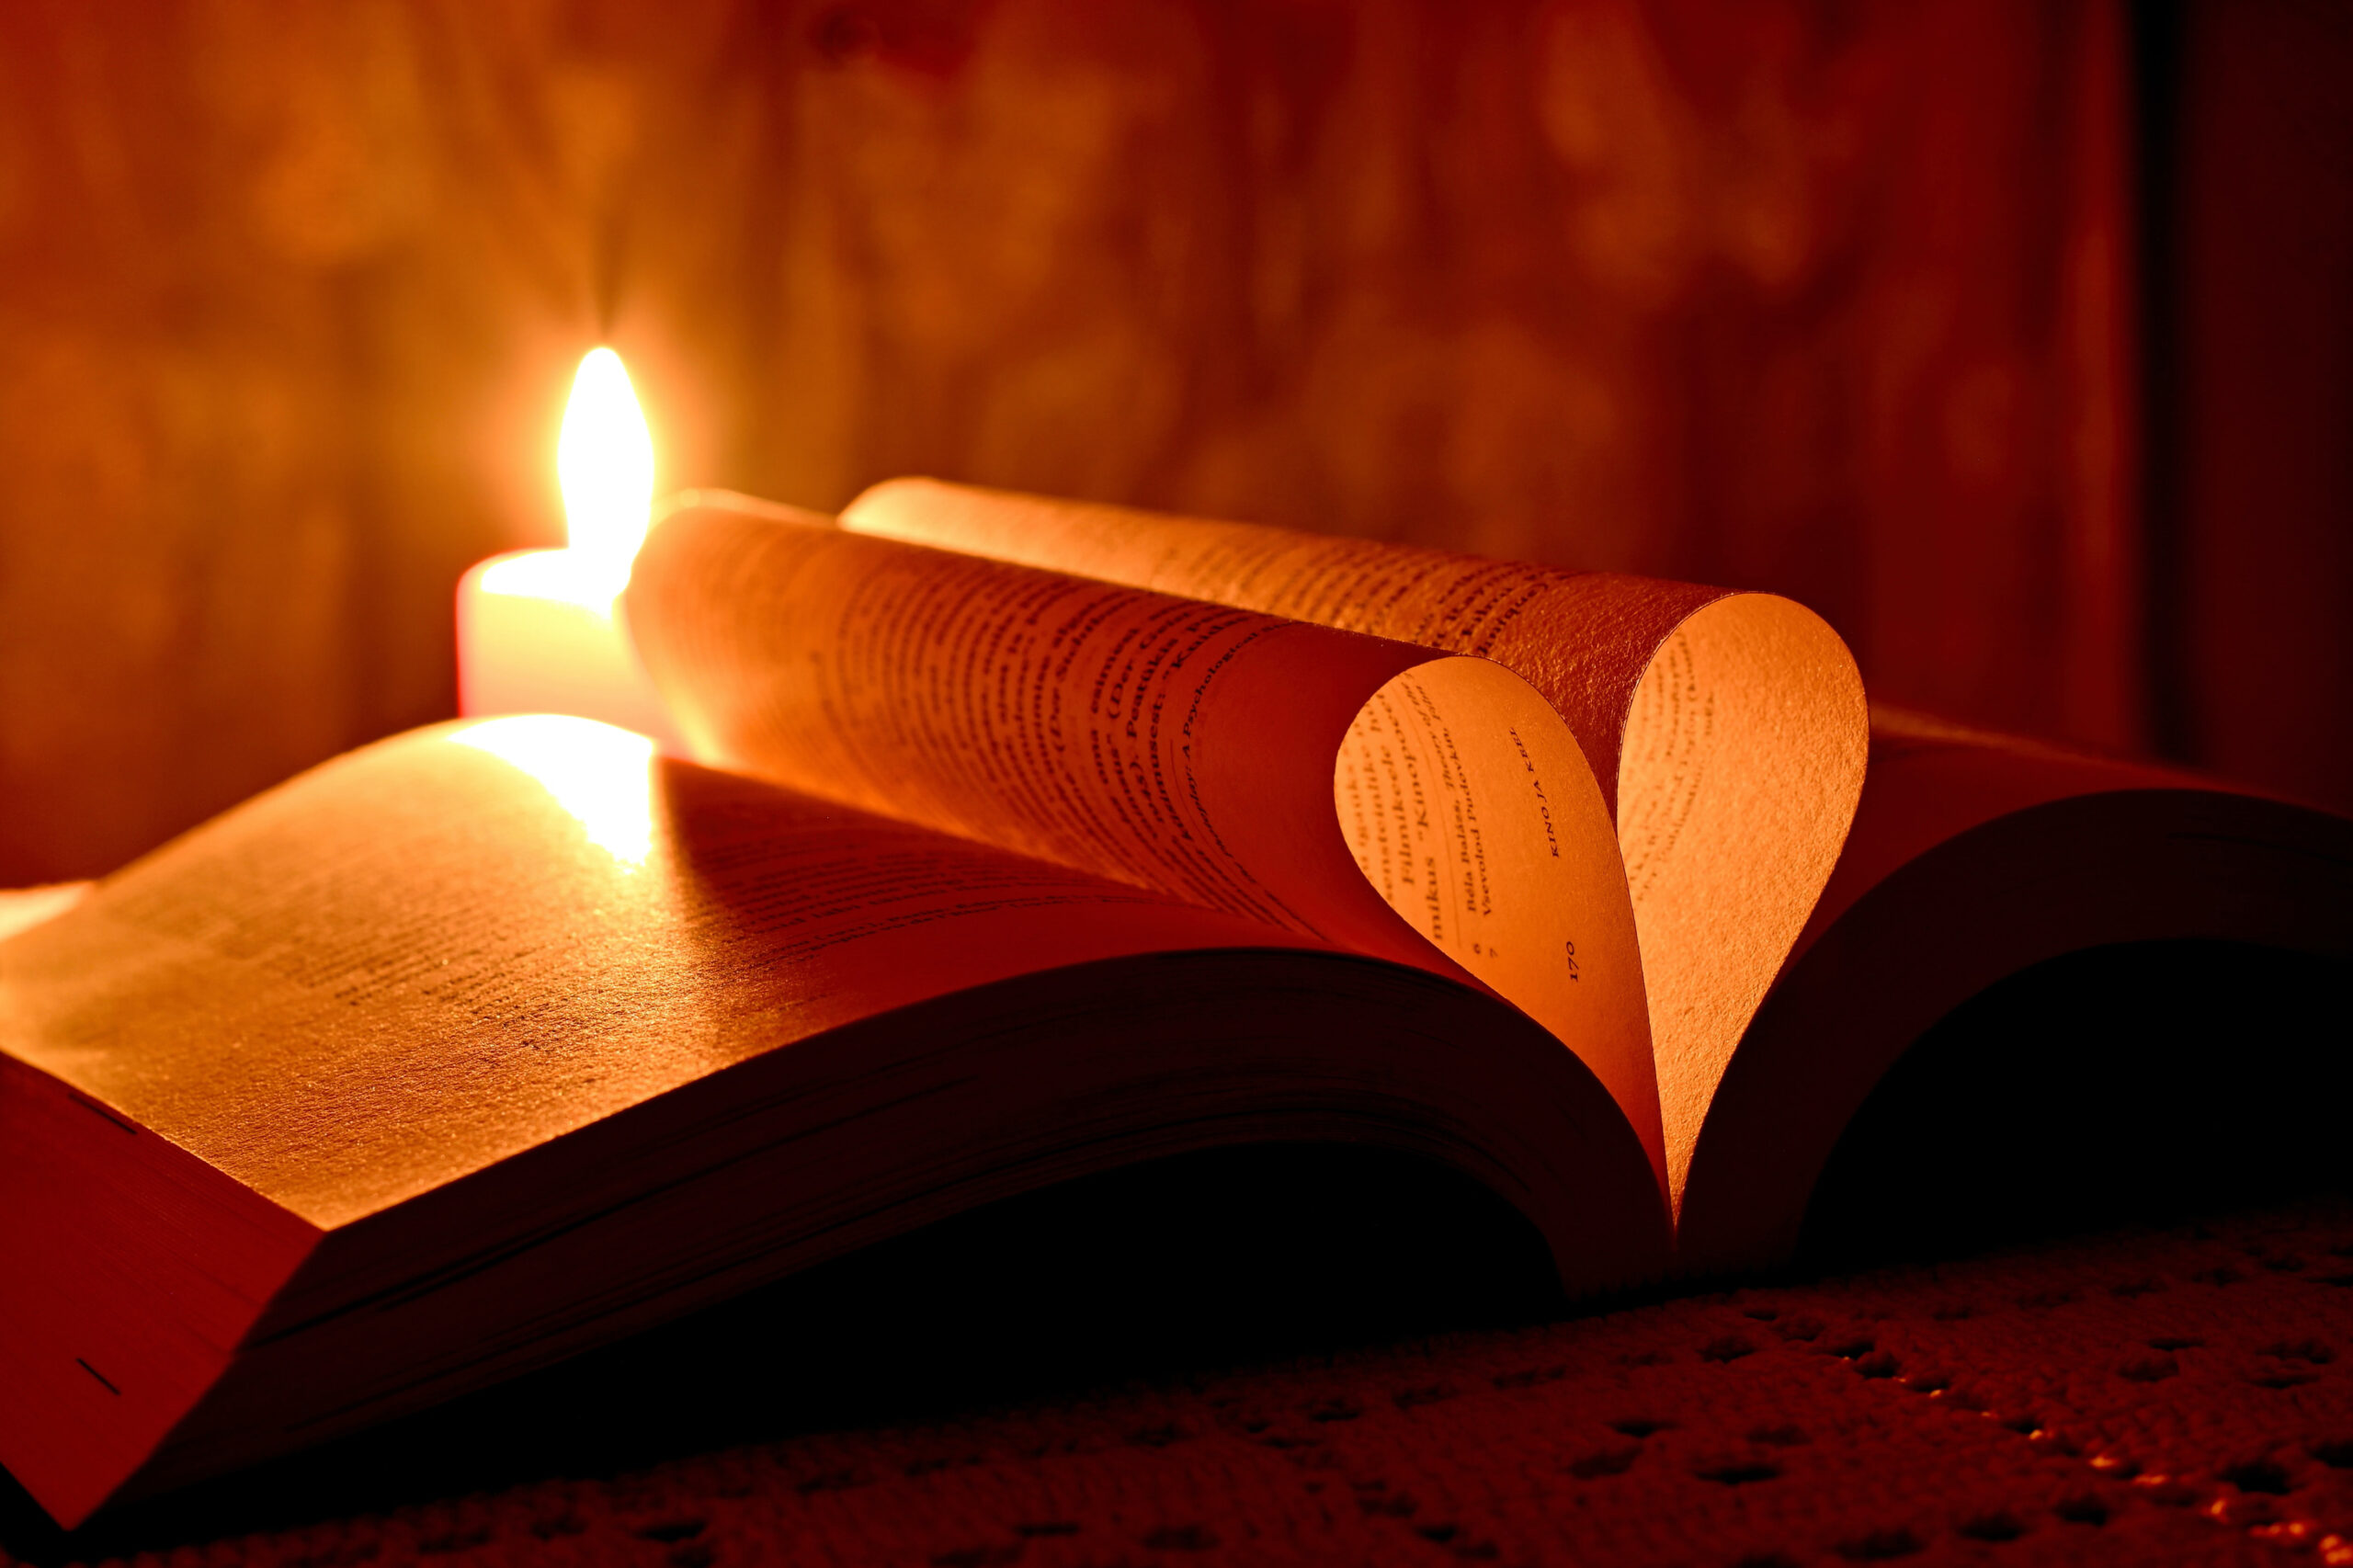 lit candle behind a bible with pages foled to make a heart shape